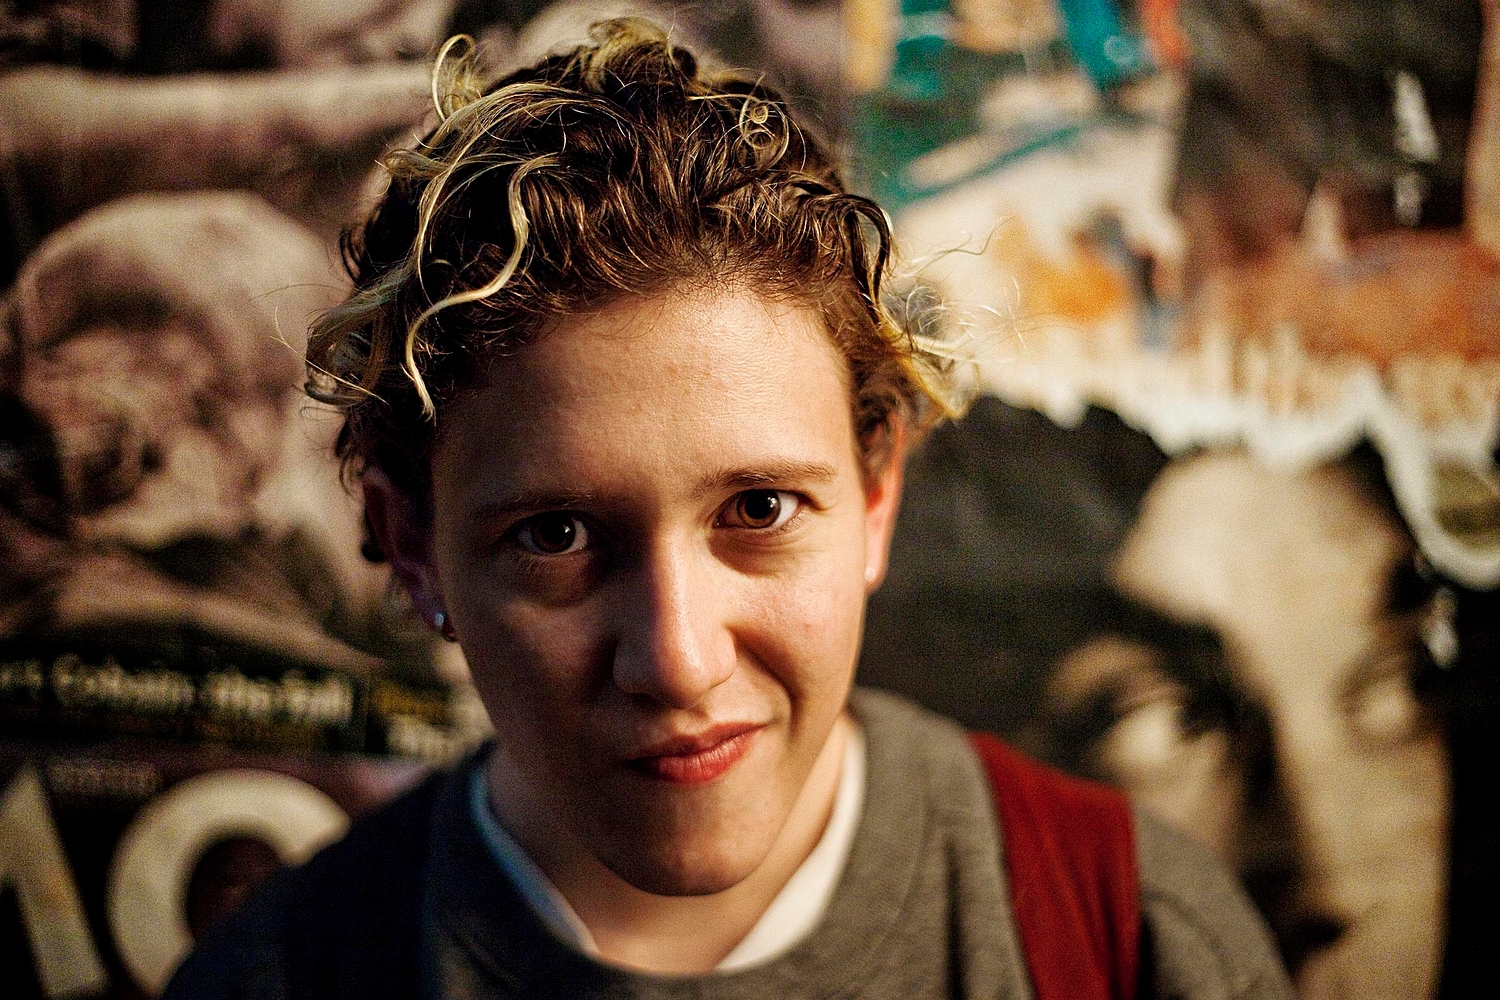 Mica Levi is creating a soundtrack to feature in new project
‘The Unfilmables’